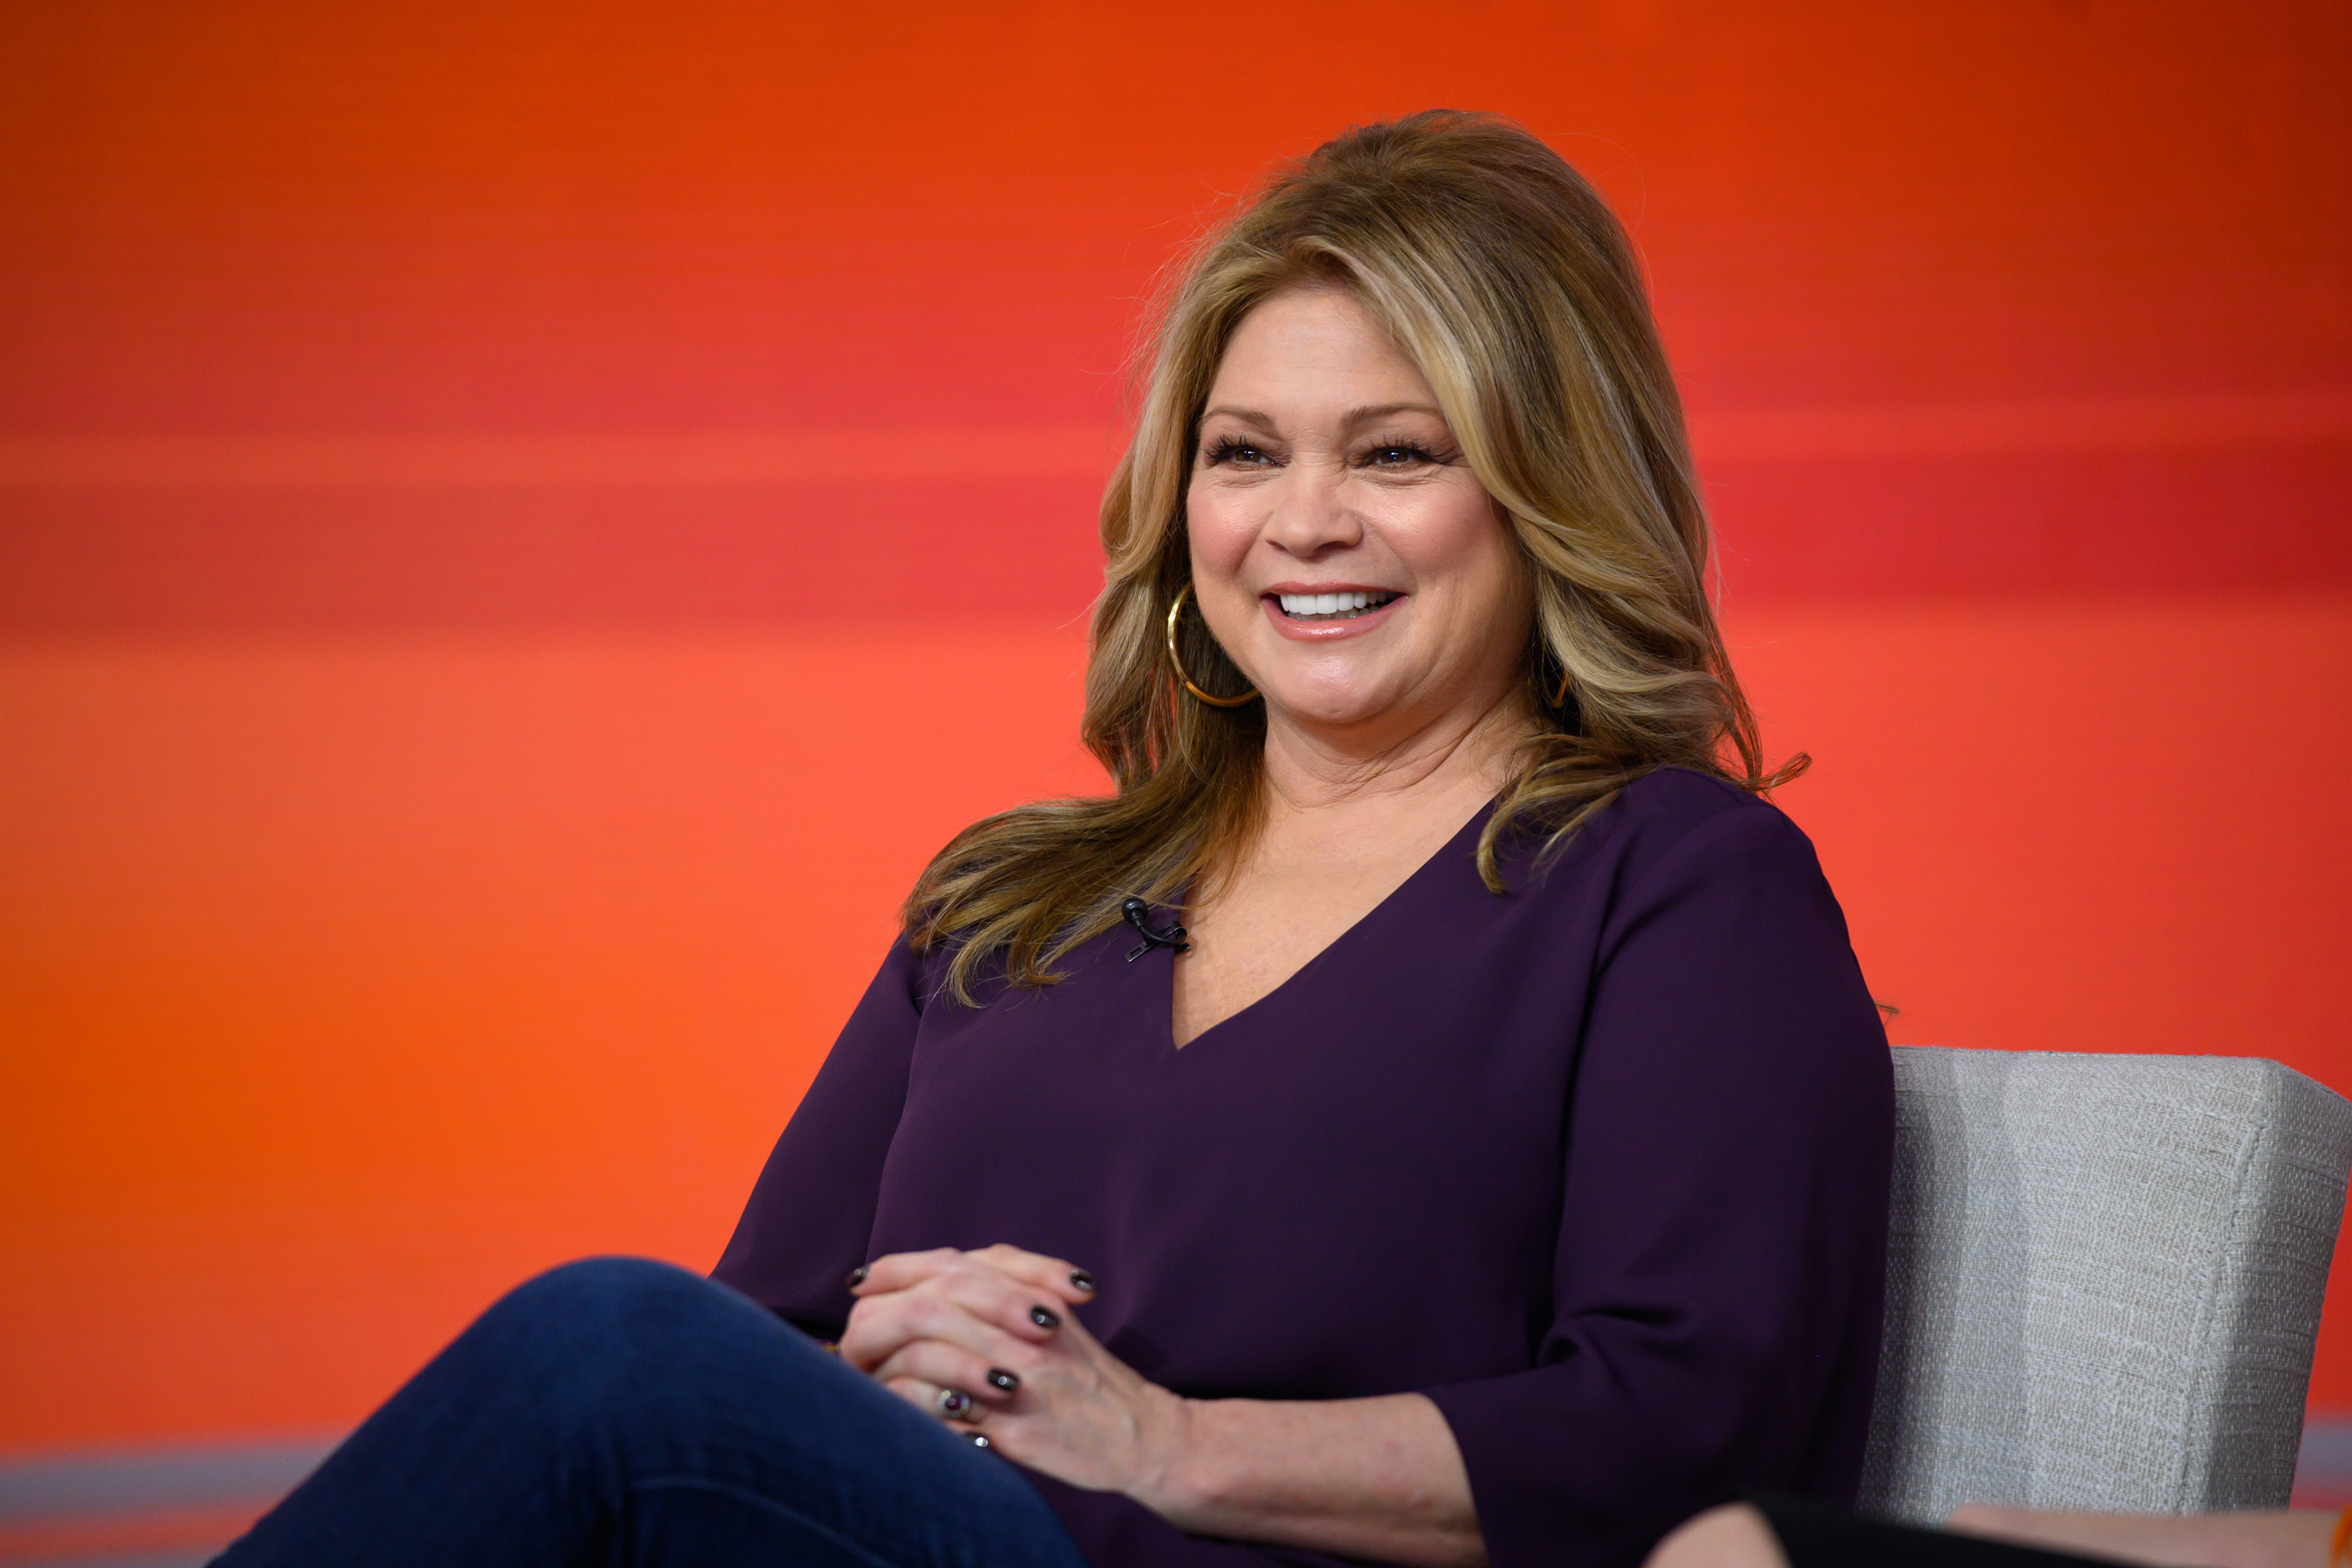 Valerie Bertinelli on "Today" on January 24, 2020. | Source: Getty Images